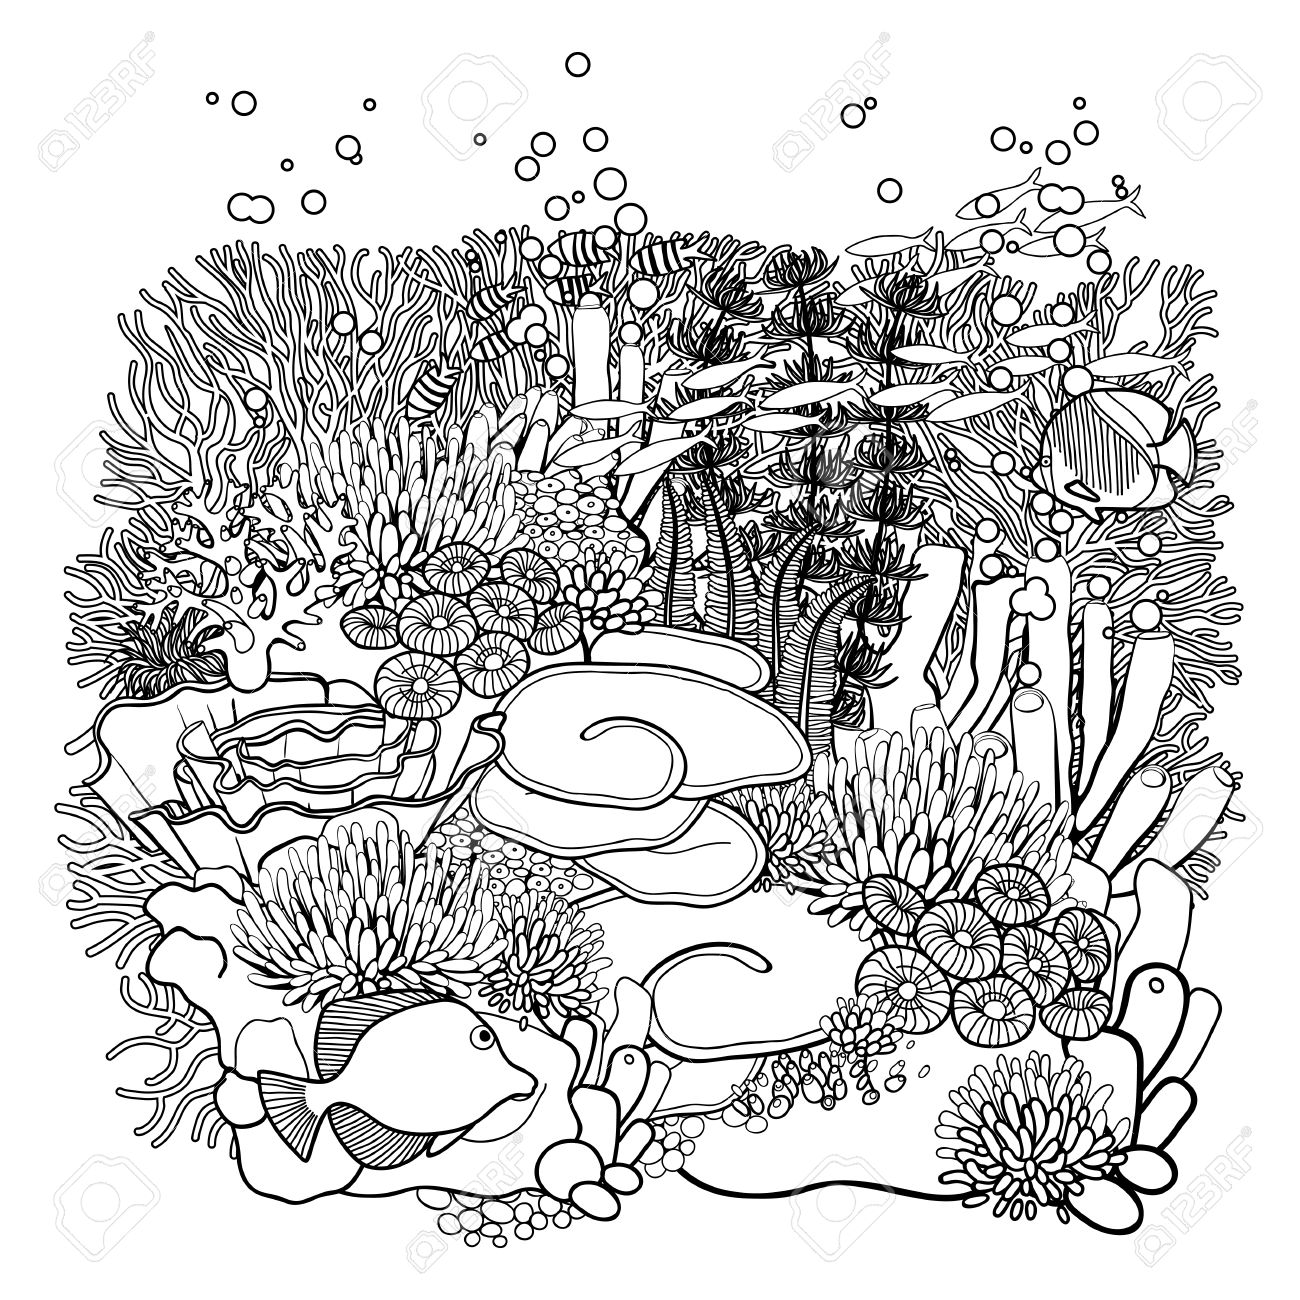 Sea Coral Coloring Pages at GetColorings.com | Free printable colorings ...